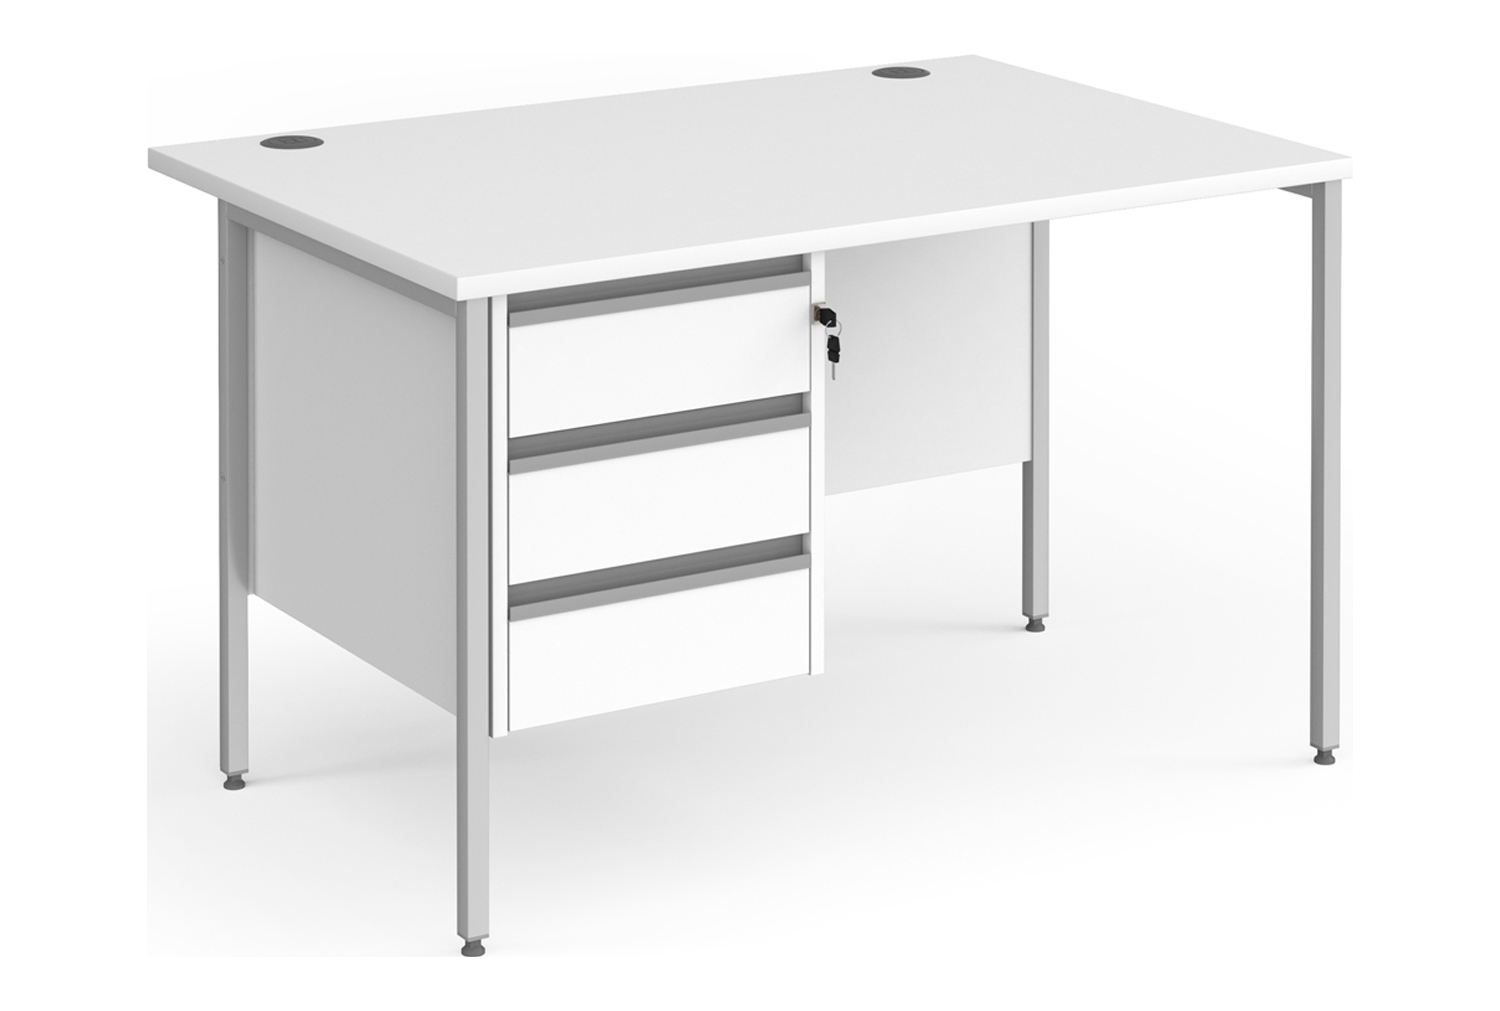 All White Rectangular H-Leg Office Desk 3 Drawers, 120wx80dx73h (cm), Express Delivery